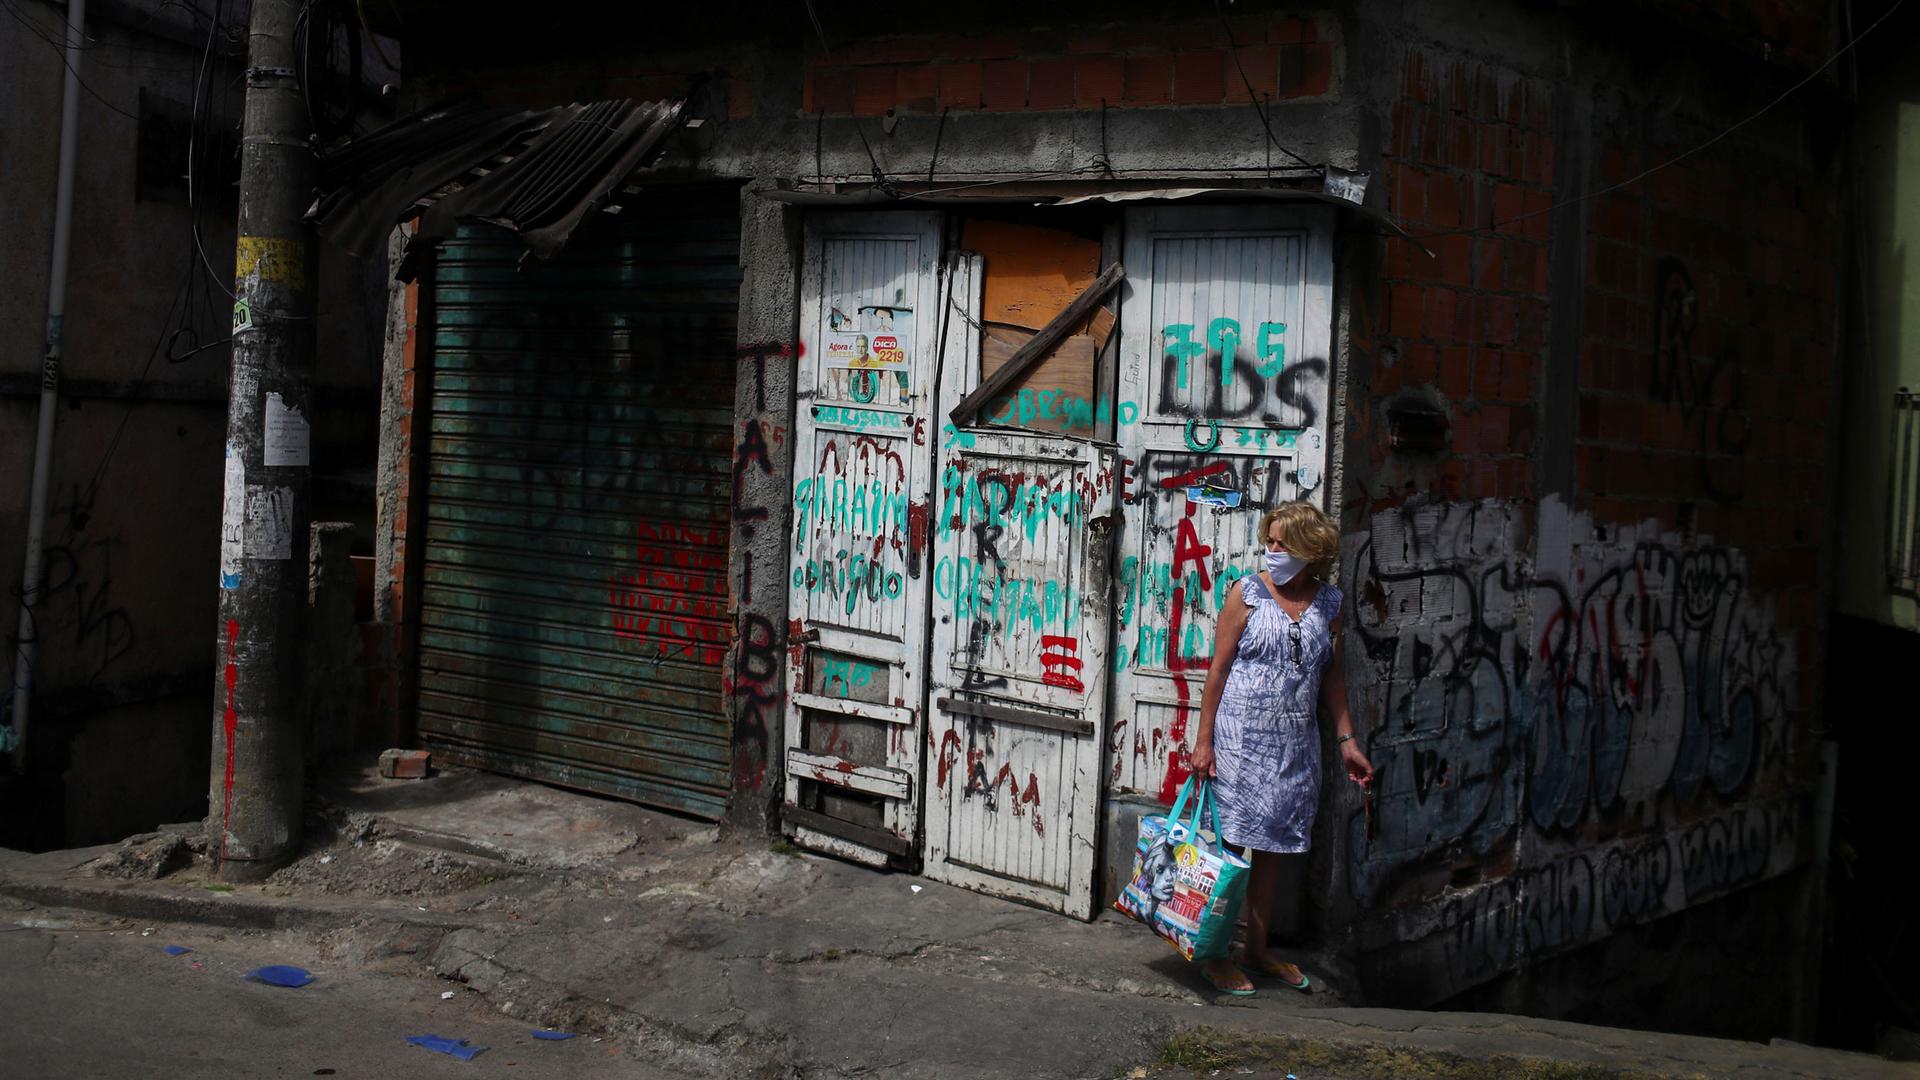 A woman is shown wearing a medical mask and carrying a bag while standing in front of doors with graffiti painted on them